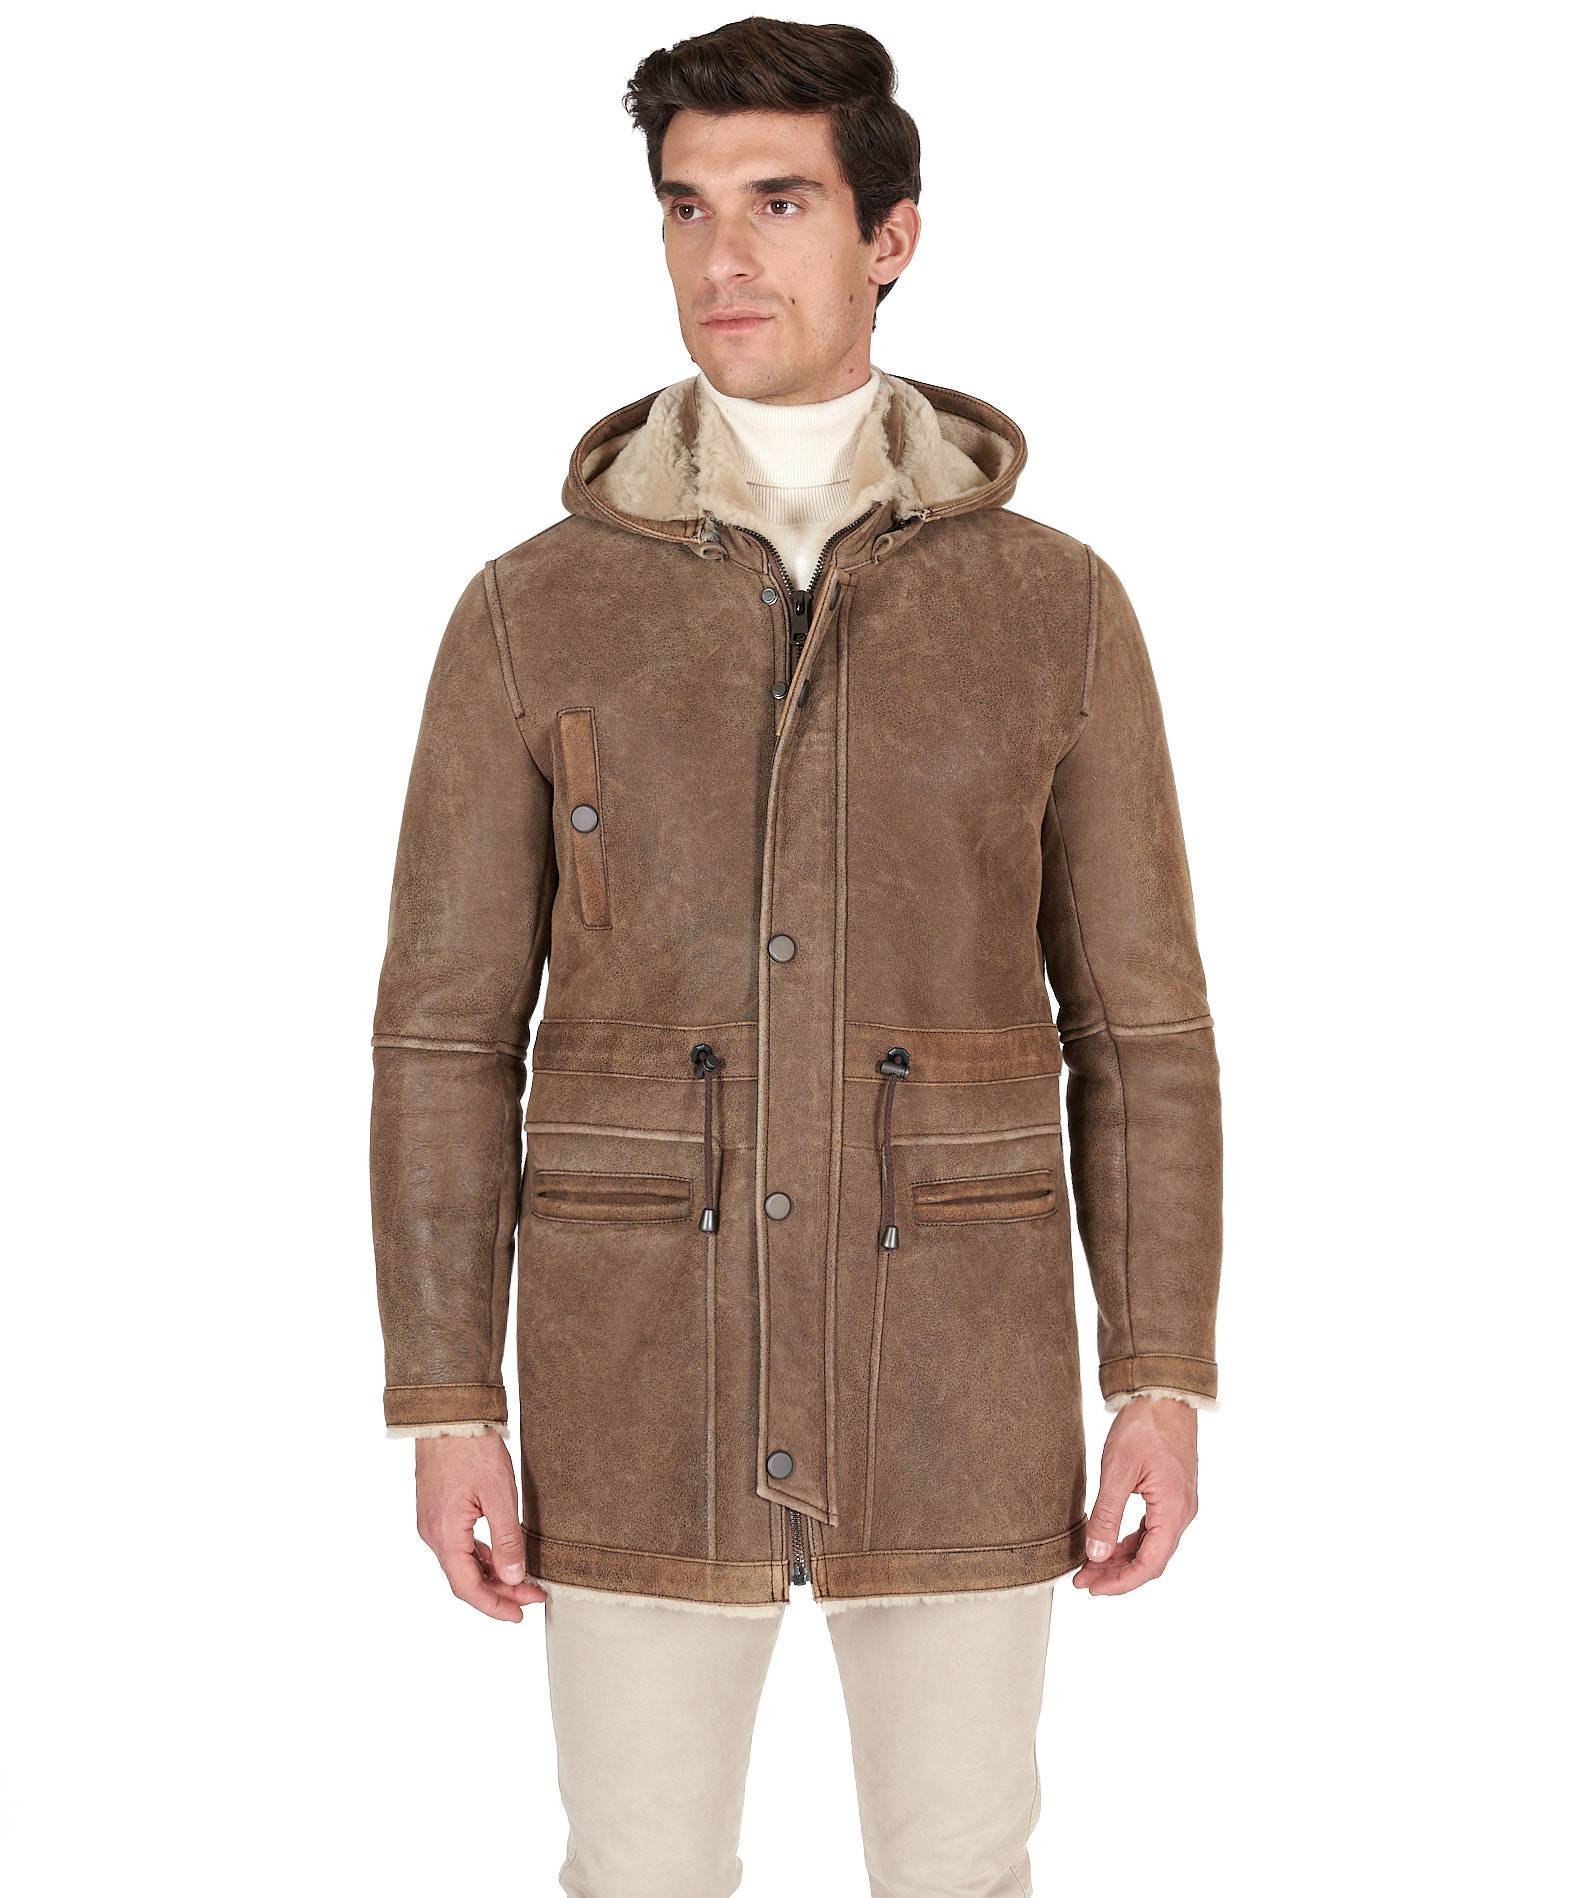 Shearling lamb coat in taupe color with detachable hood product